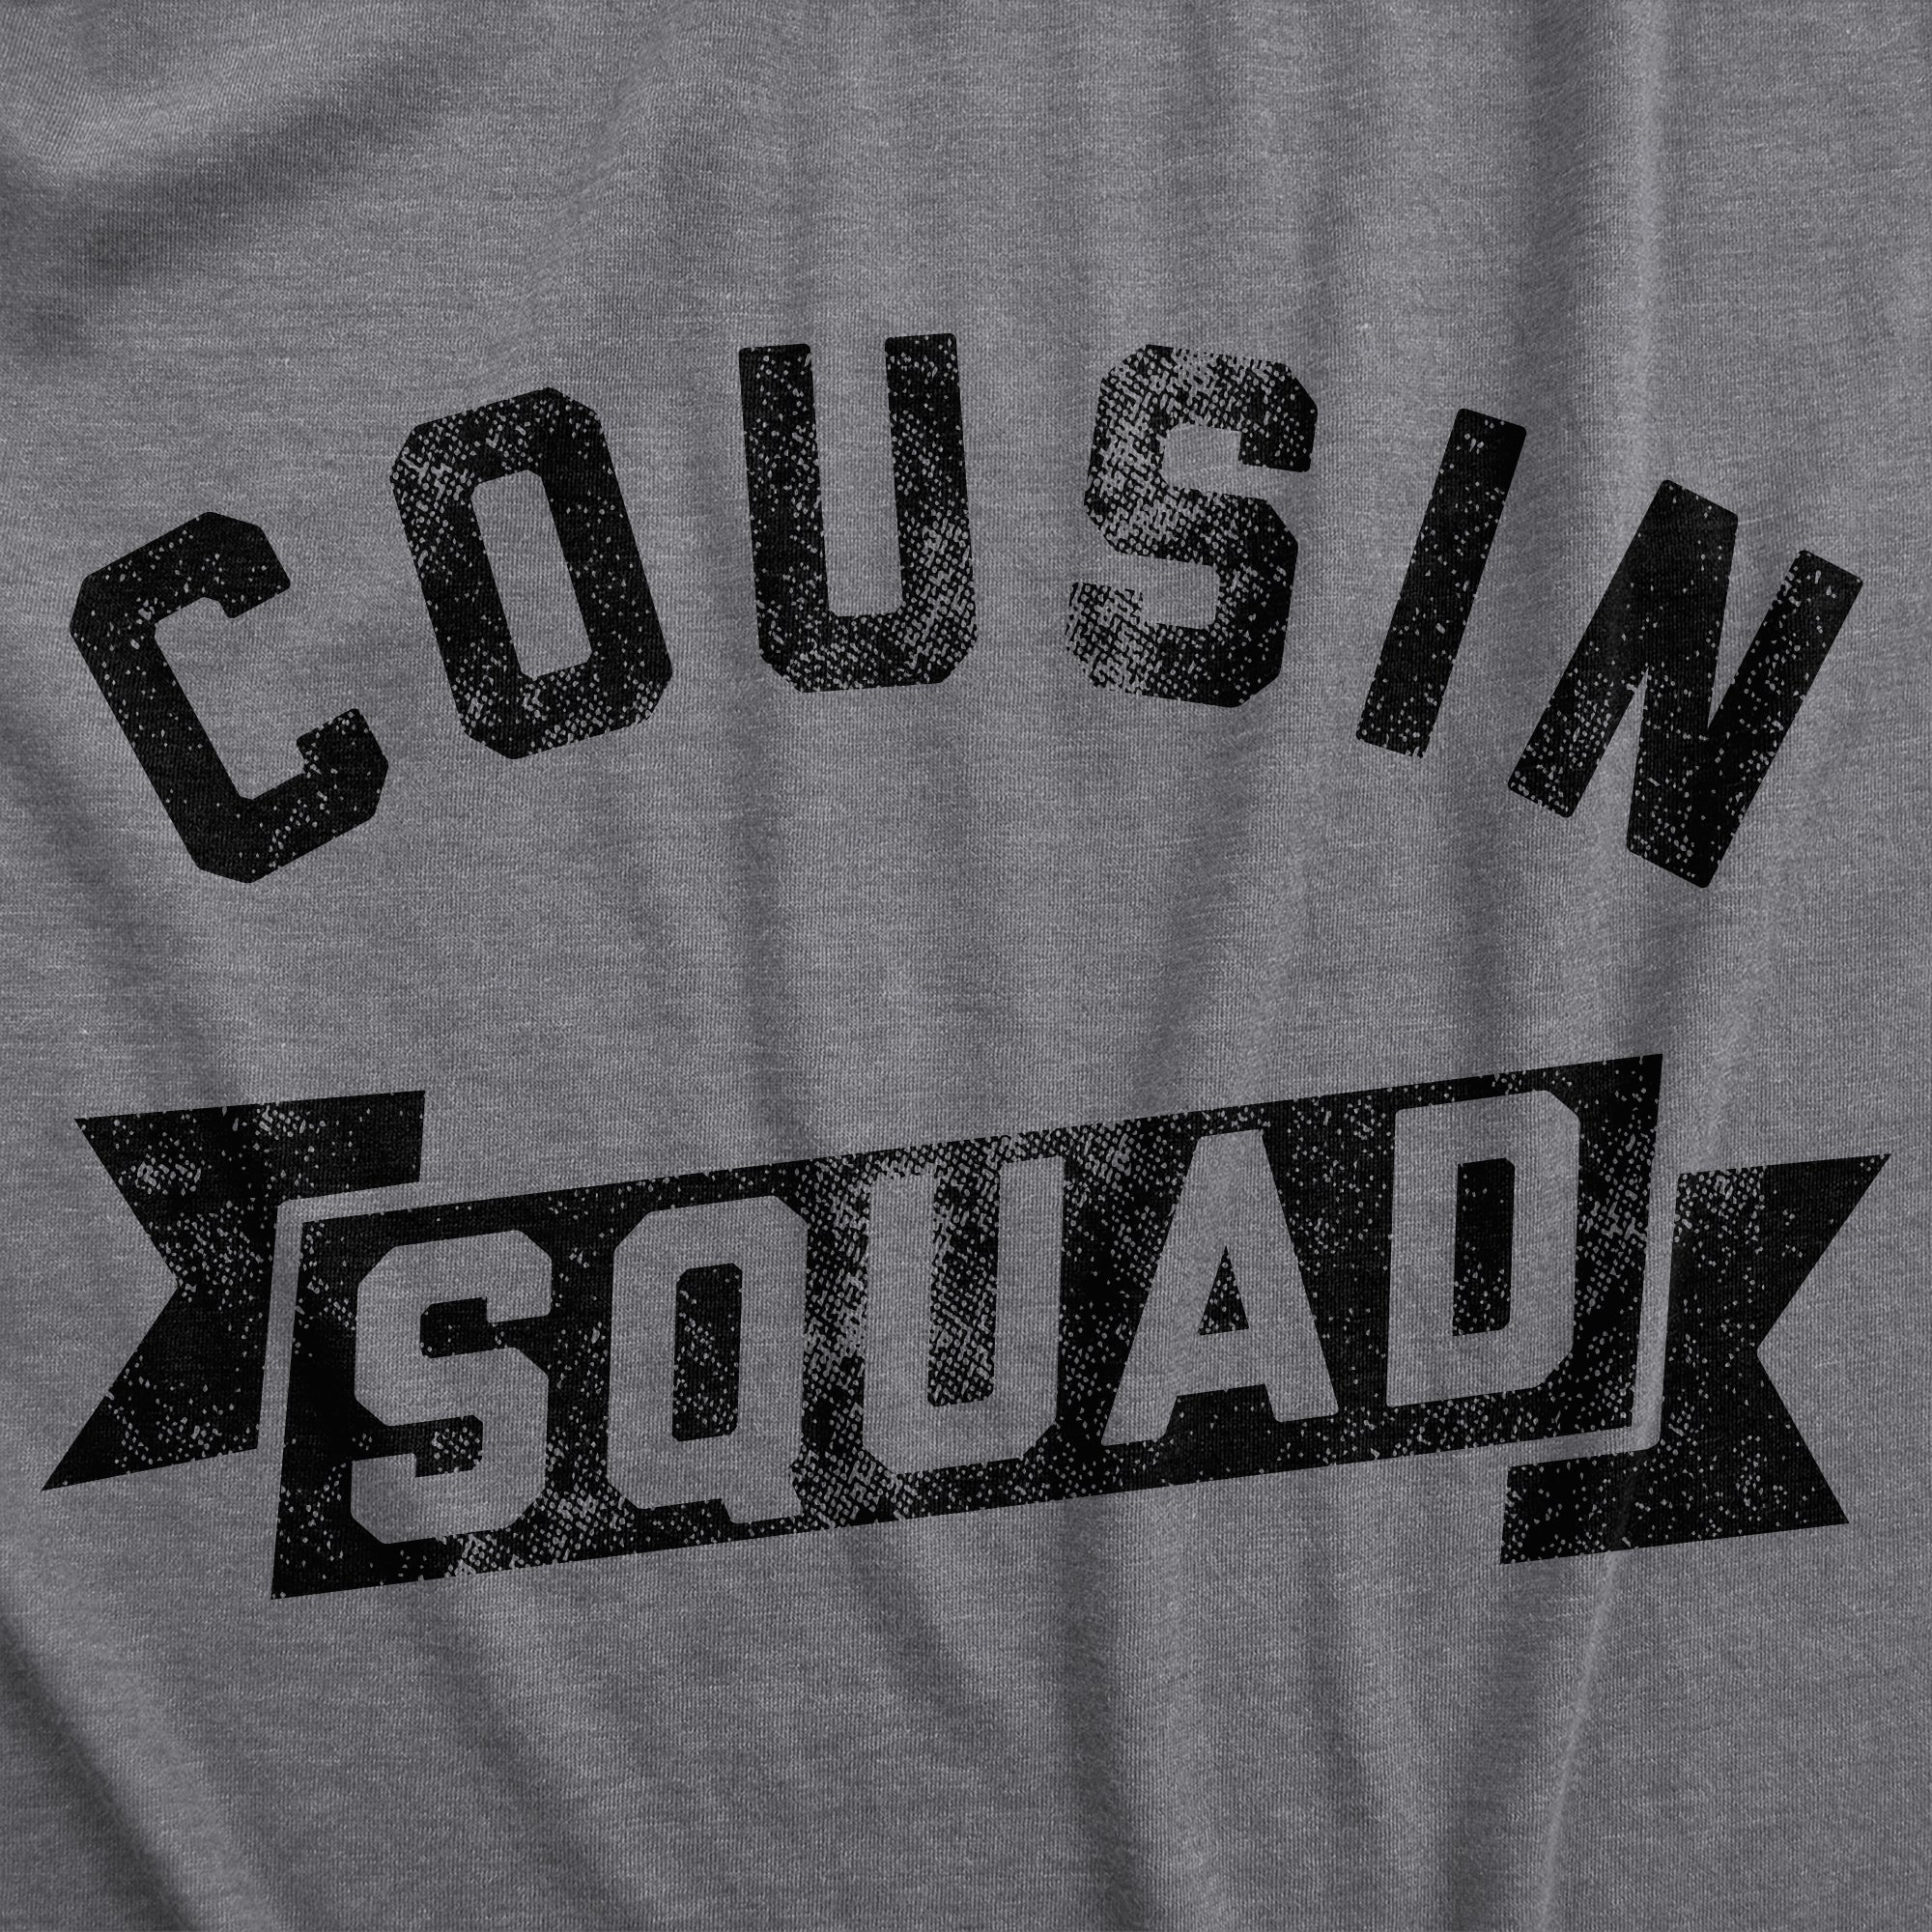 Funny Dark Heather Grey - Cousin Squad Cousin Squad Mens T Shirt Nerdy Sarcastic Tee